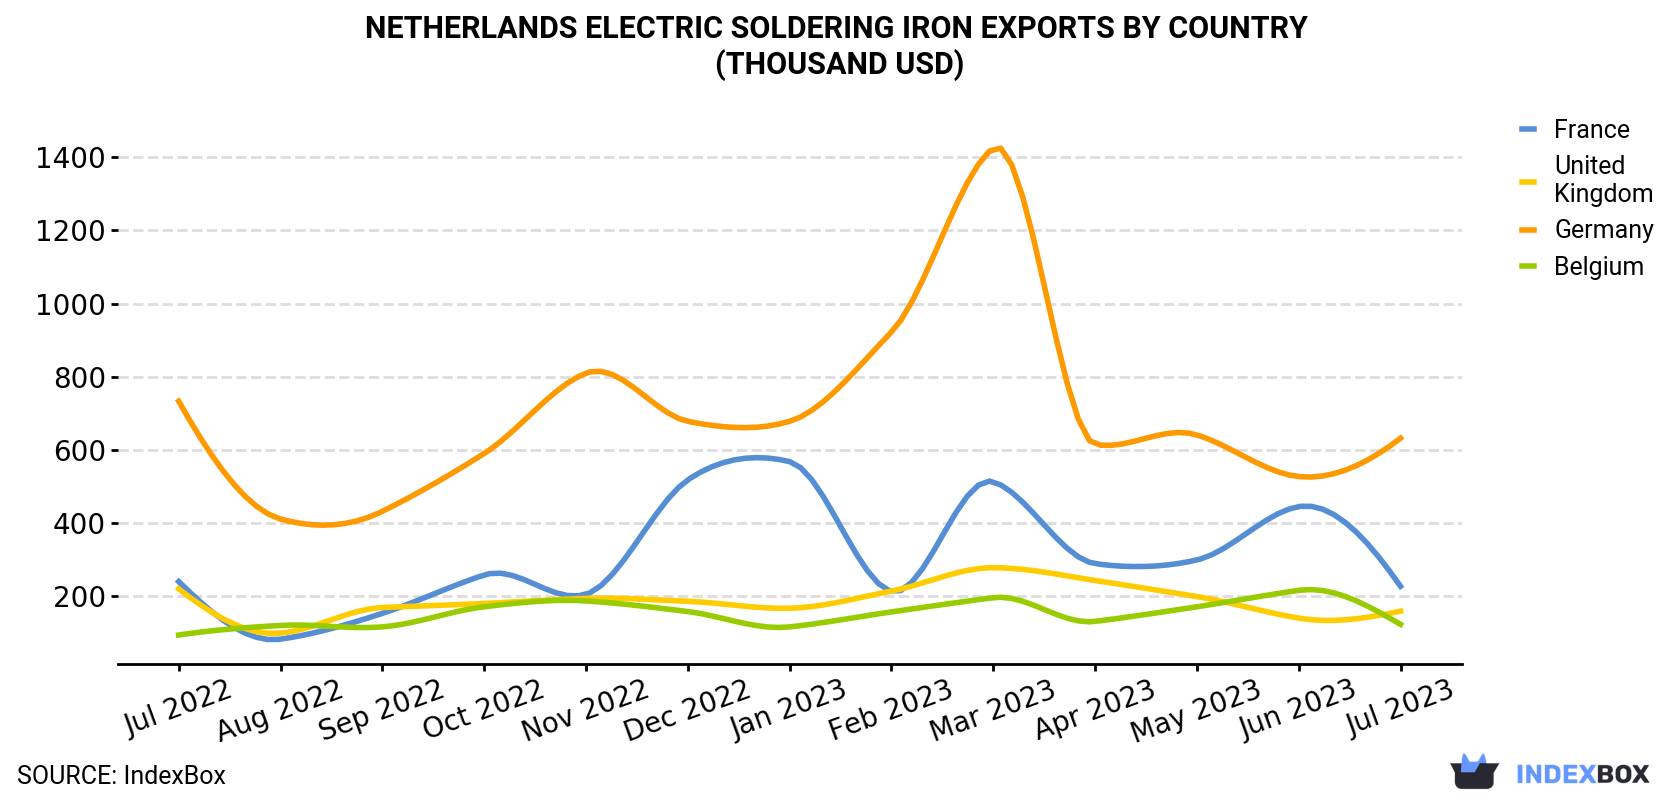 Netherlands Electric Soldering Iron Exports By Country (Thousand USD)